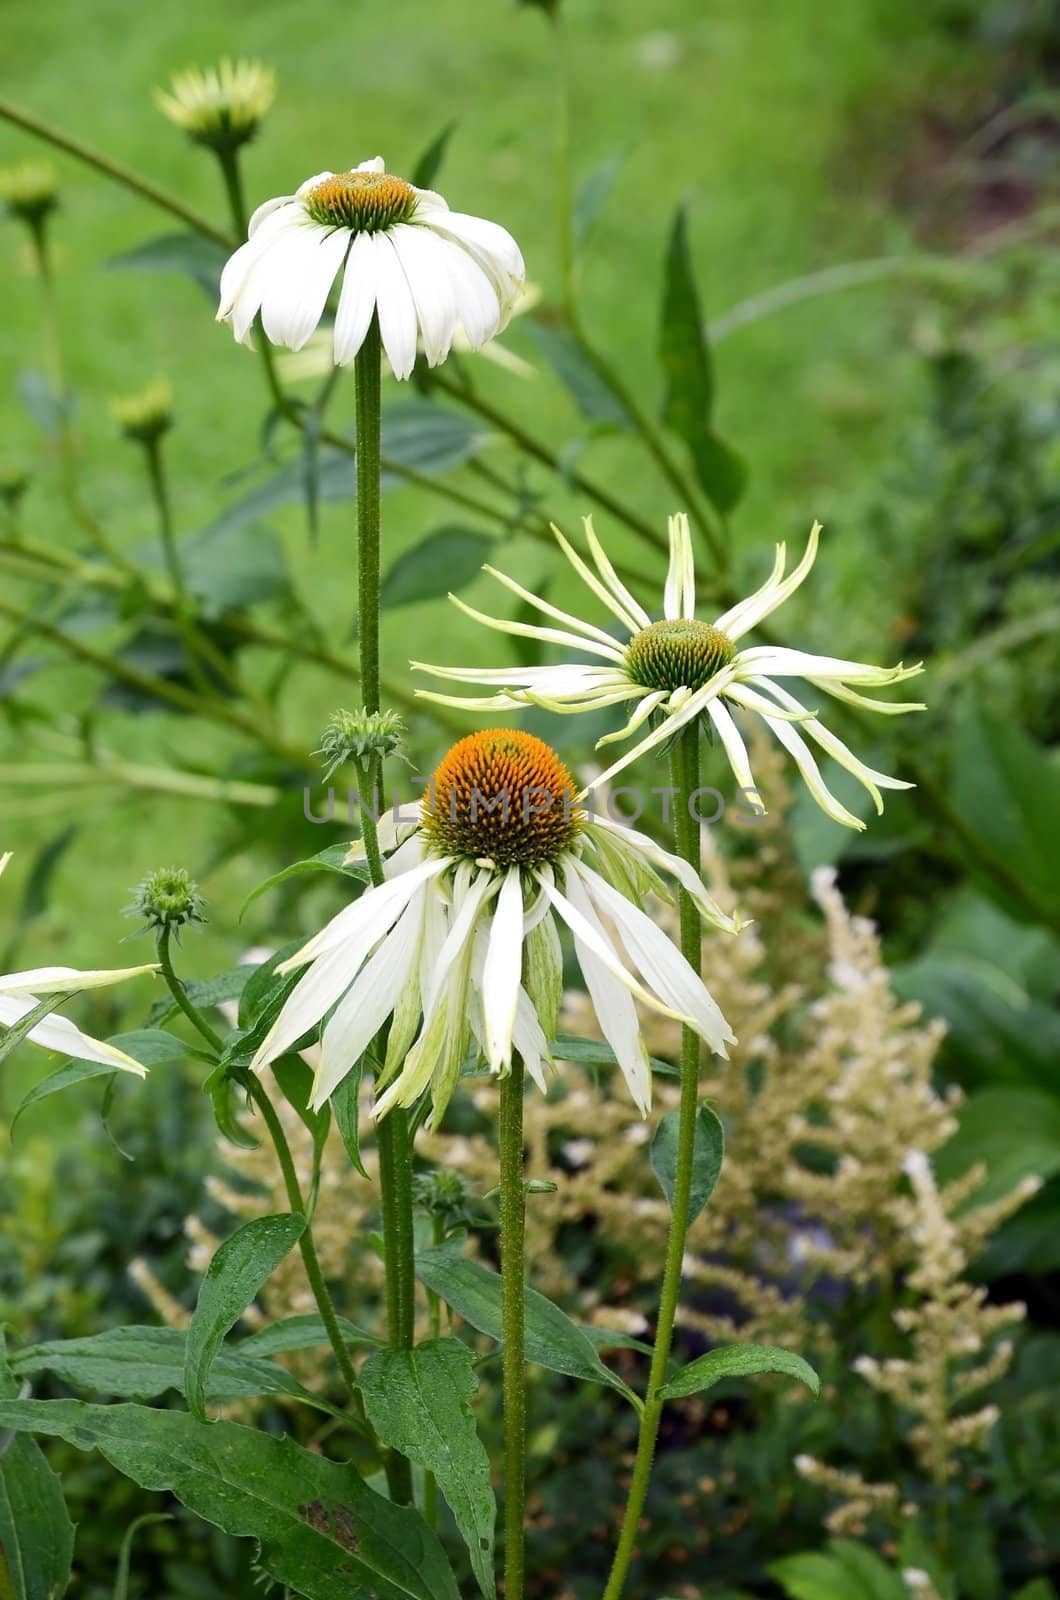 A flower called Echinacea